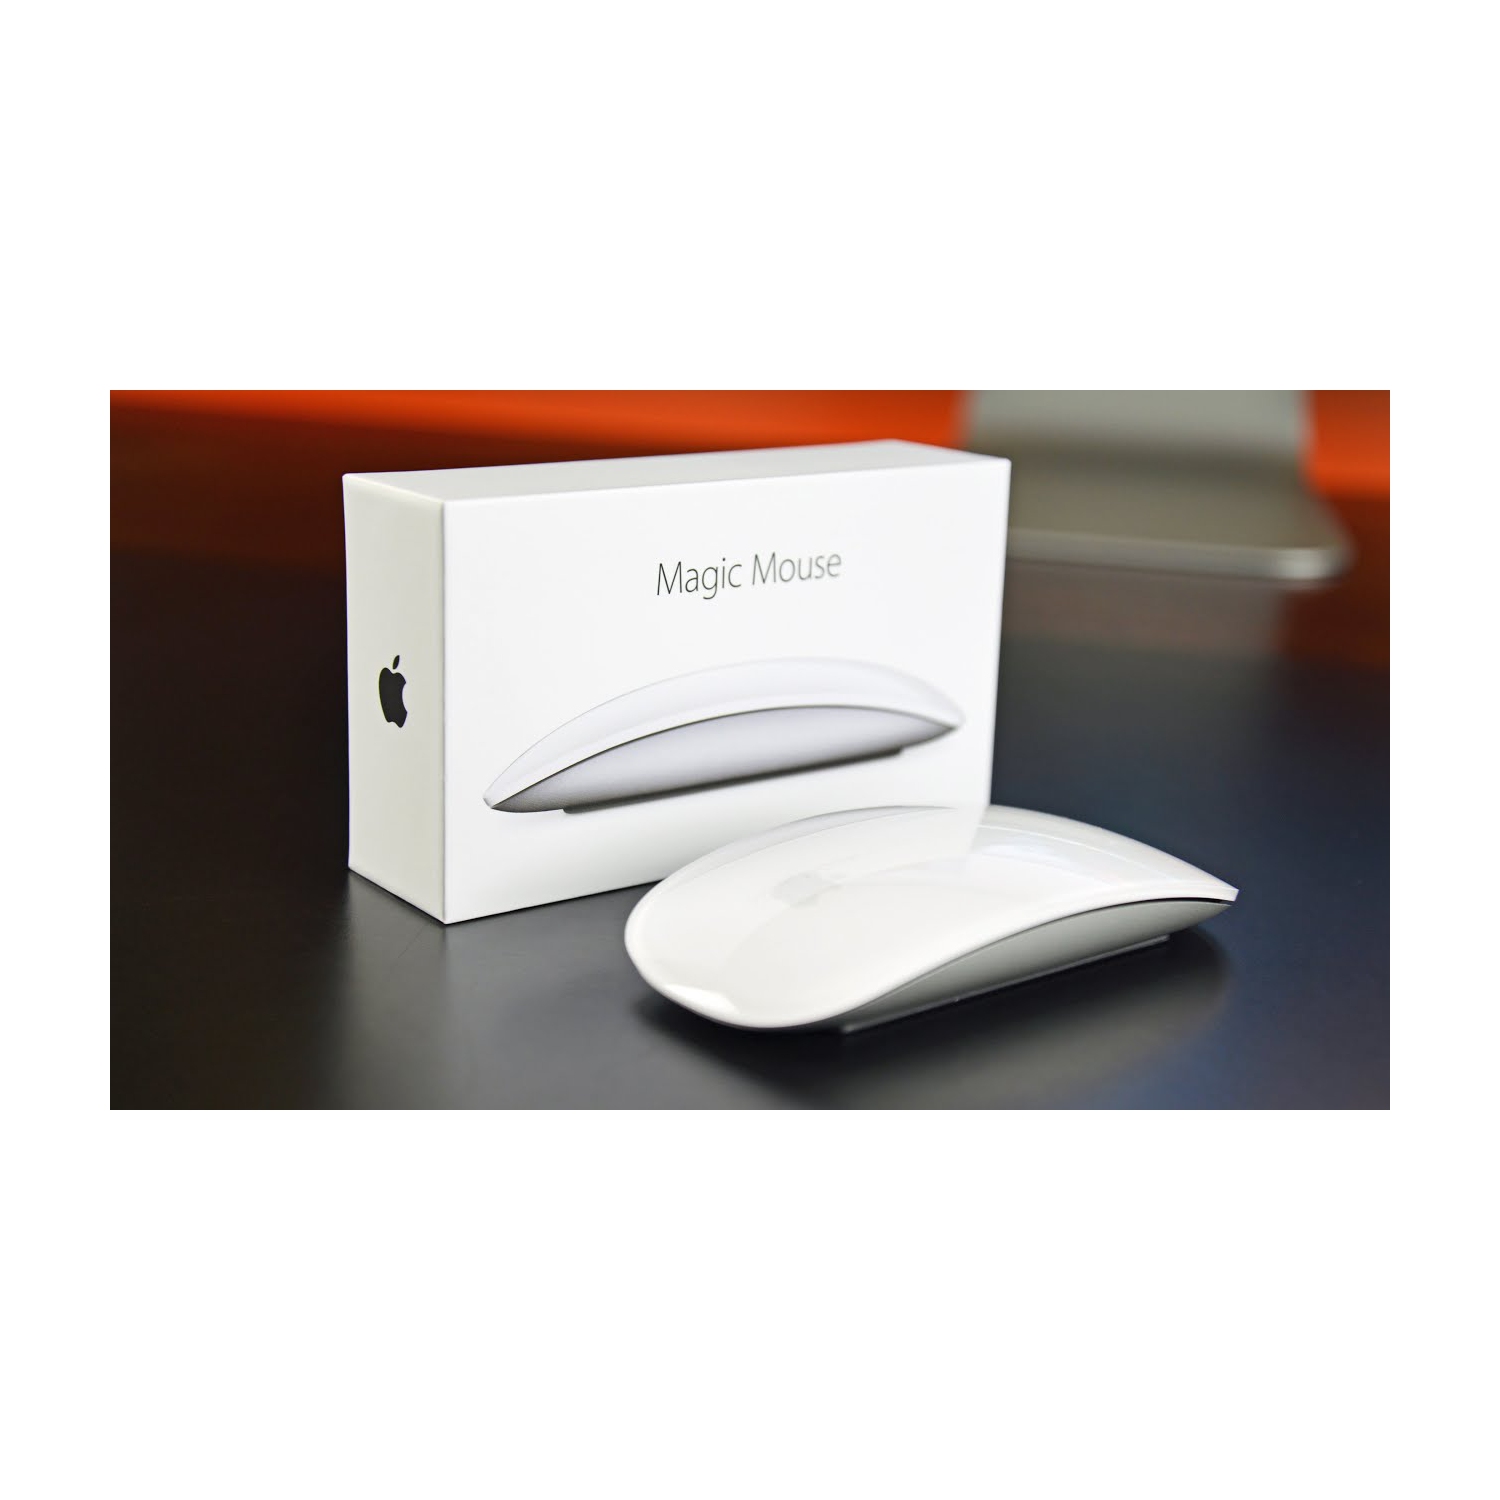 Apple Magic Mouse 2 (MLA02LL/A) - White - New Sealed Box | Best 